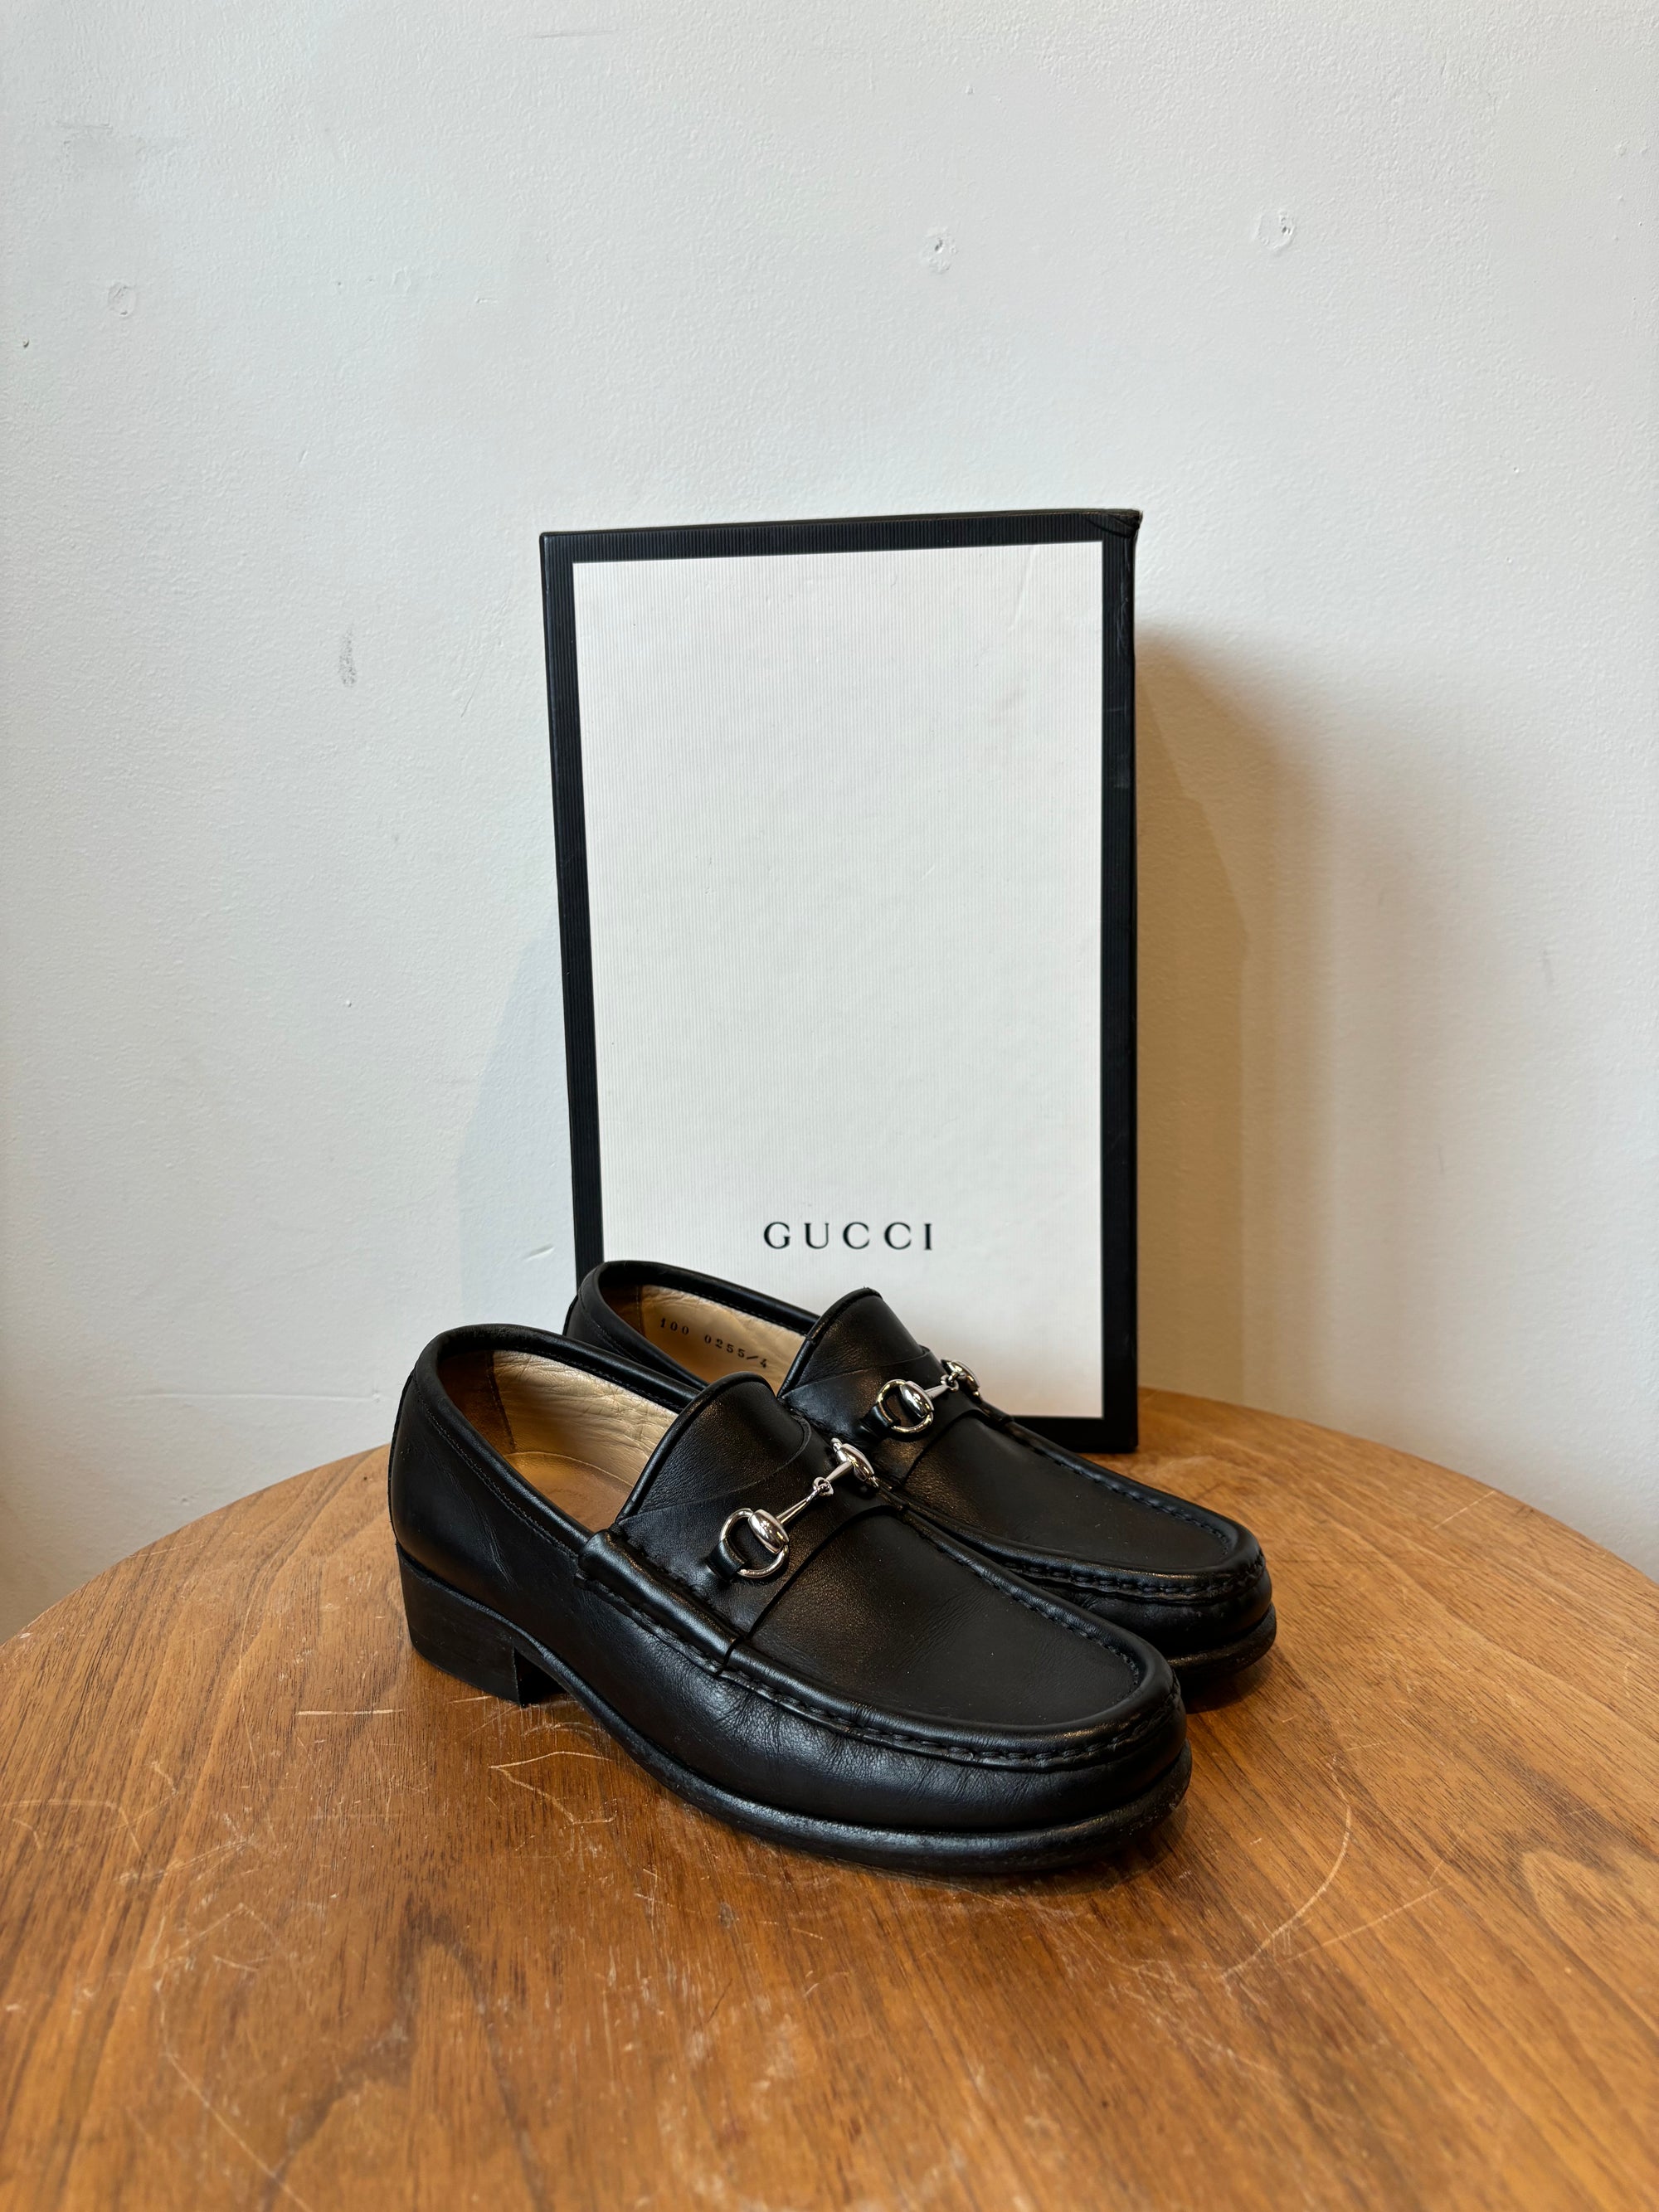 Gucci Leather Loafers Black, Size 5.5